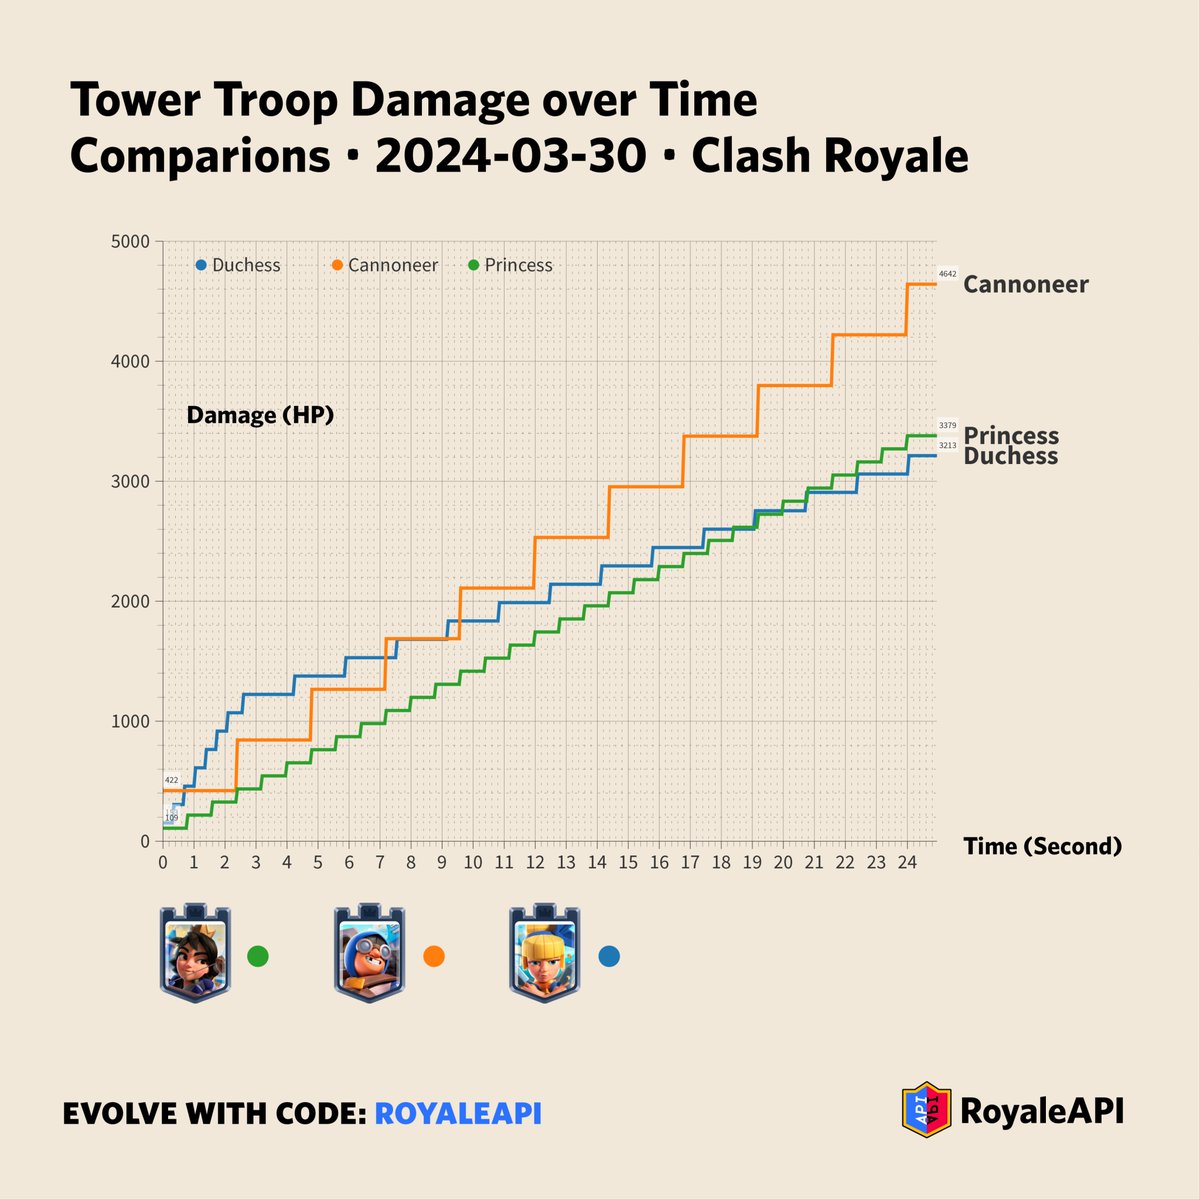 We charted the damage over time for all the tower troops in Clash Royale. Compare how these cards perform: Cannoneer, Princess, Duchess. #infovis 

See our in-depth guide in the thread.